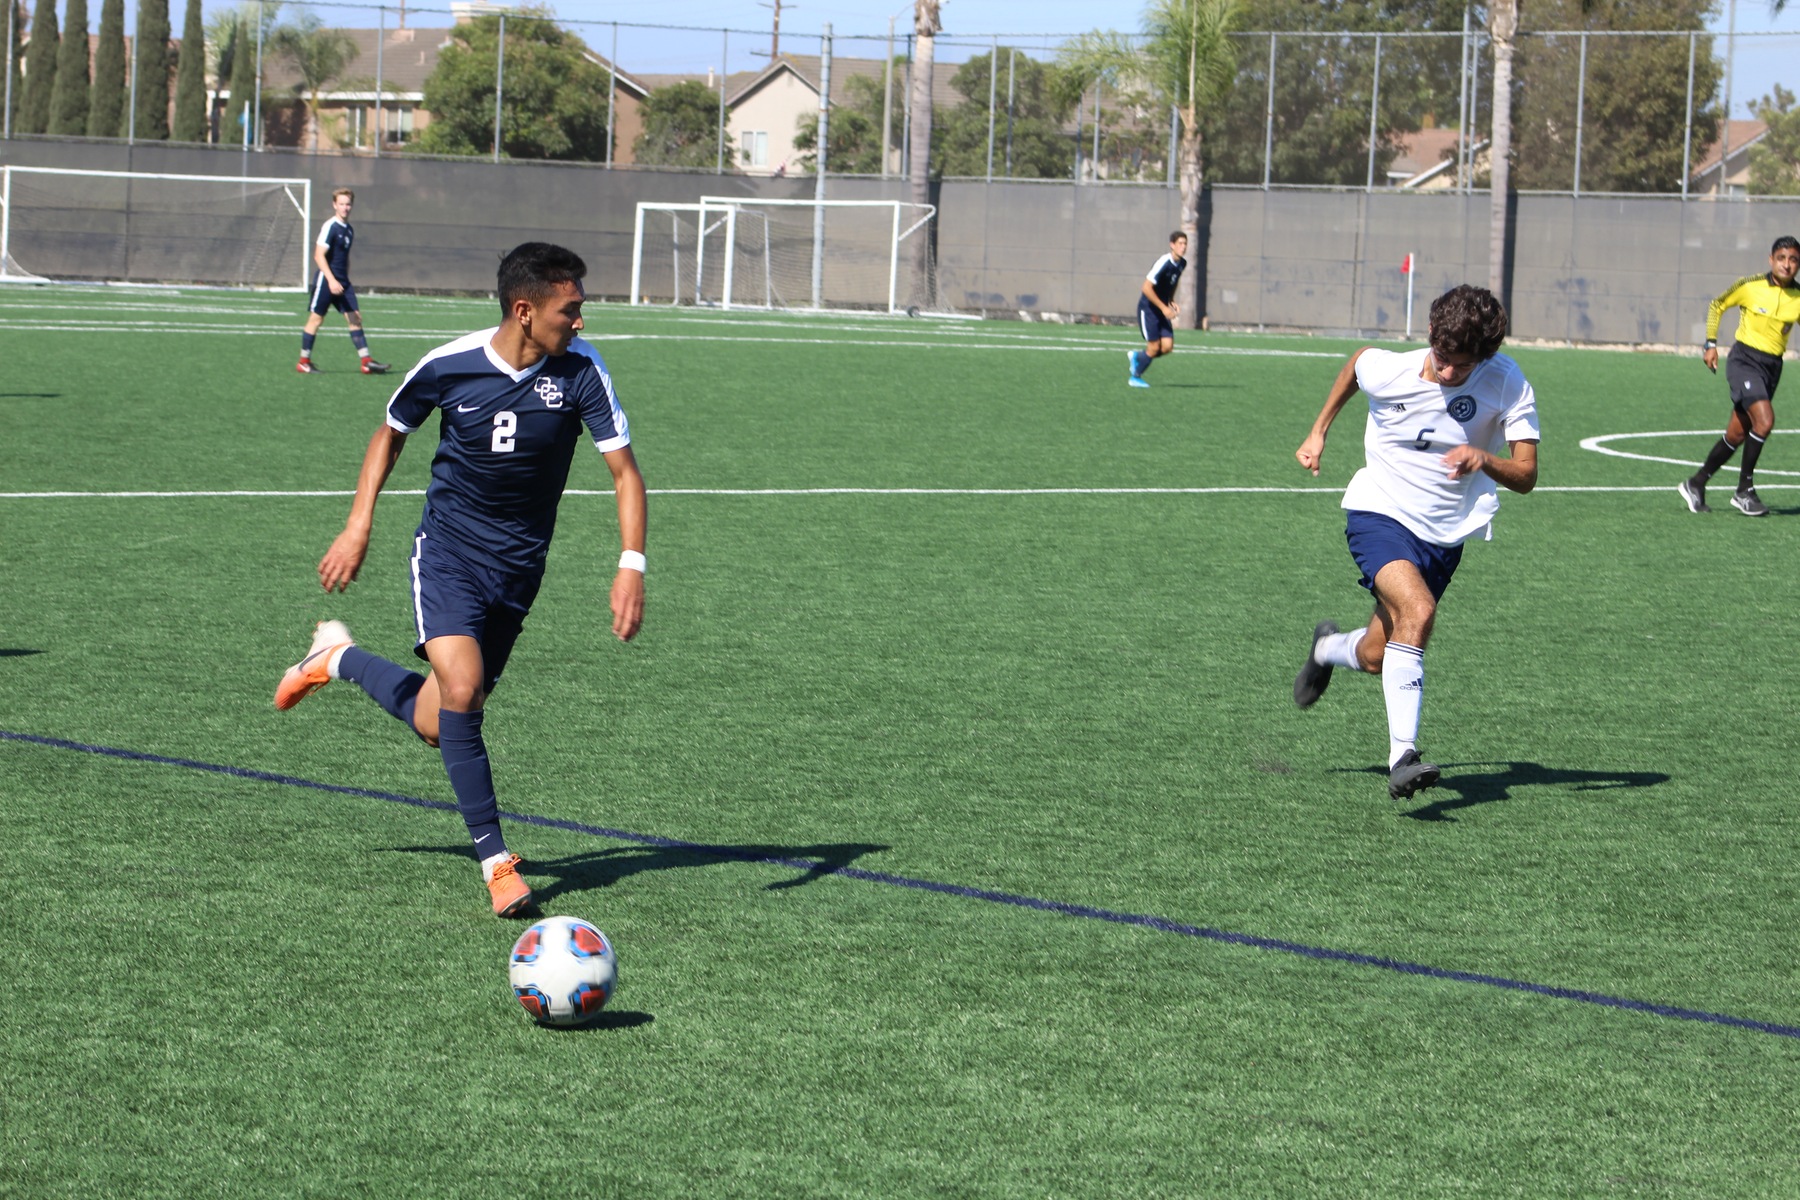 Pirates hang on for 1-0 win over Irvine Valley